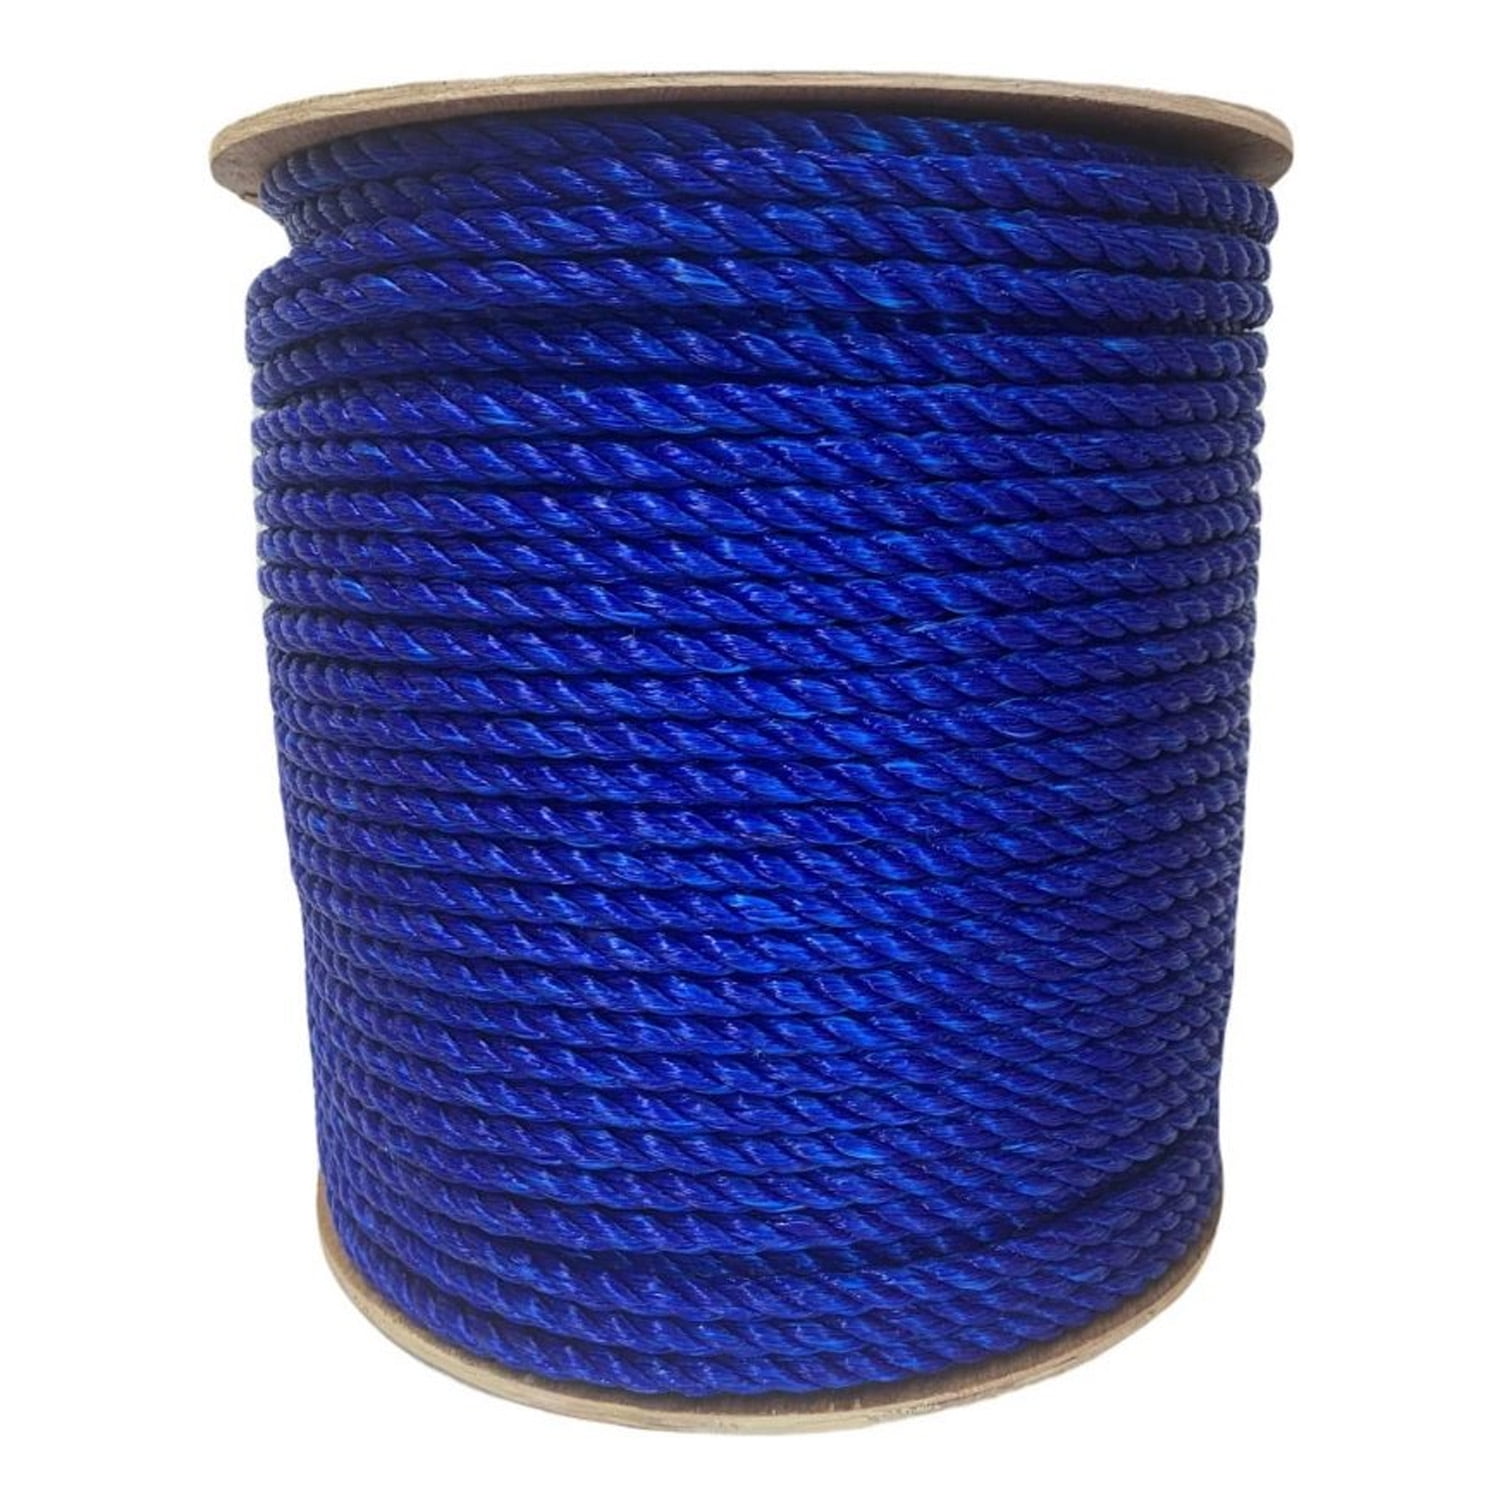 ATERET Twisted 3-Strand Blue Polypropylene Rope Monofilament I 3/8 x 600  Feet I 2,430 lbs. Tensile Strength I Lightweight & Heavy-Duty Synthetic  Cord